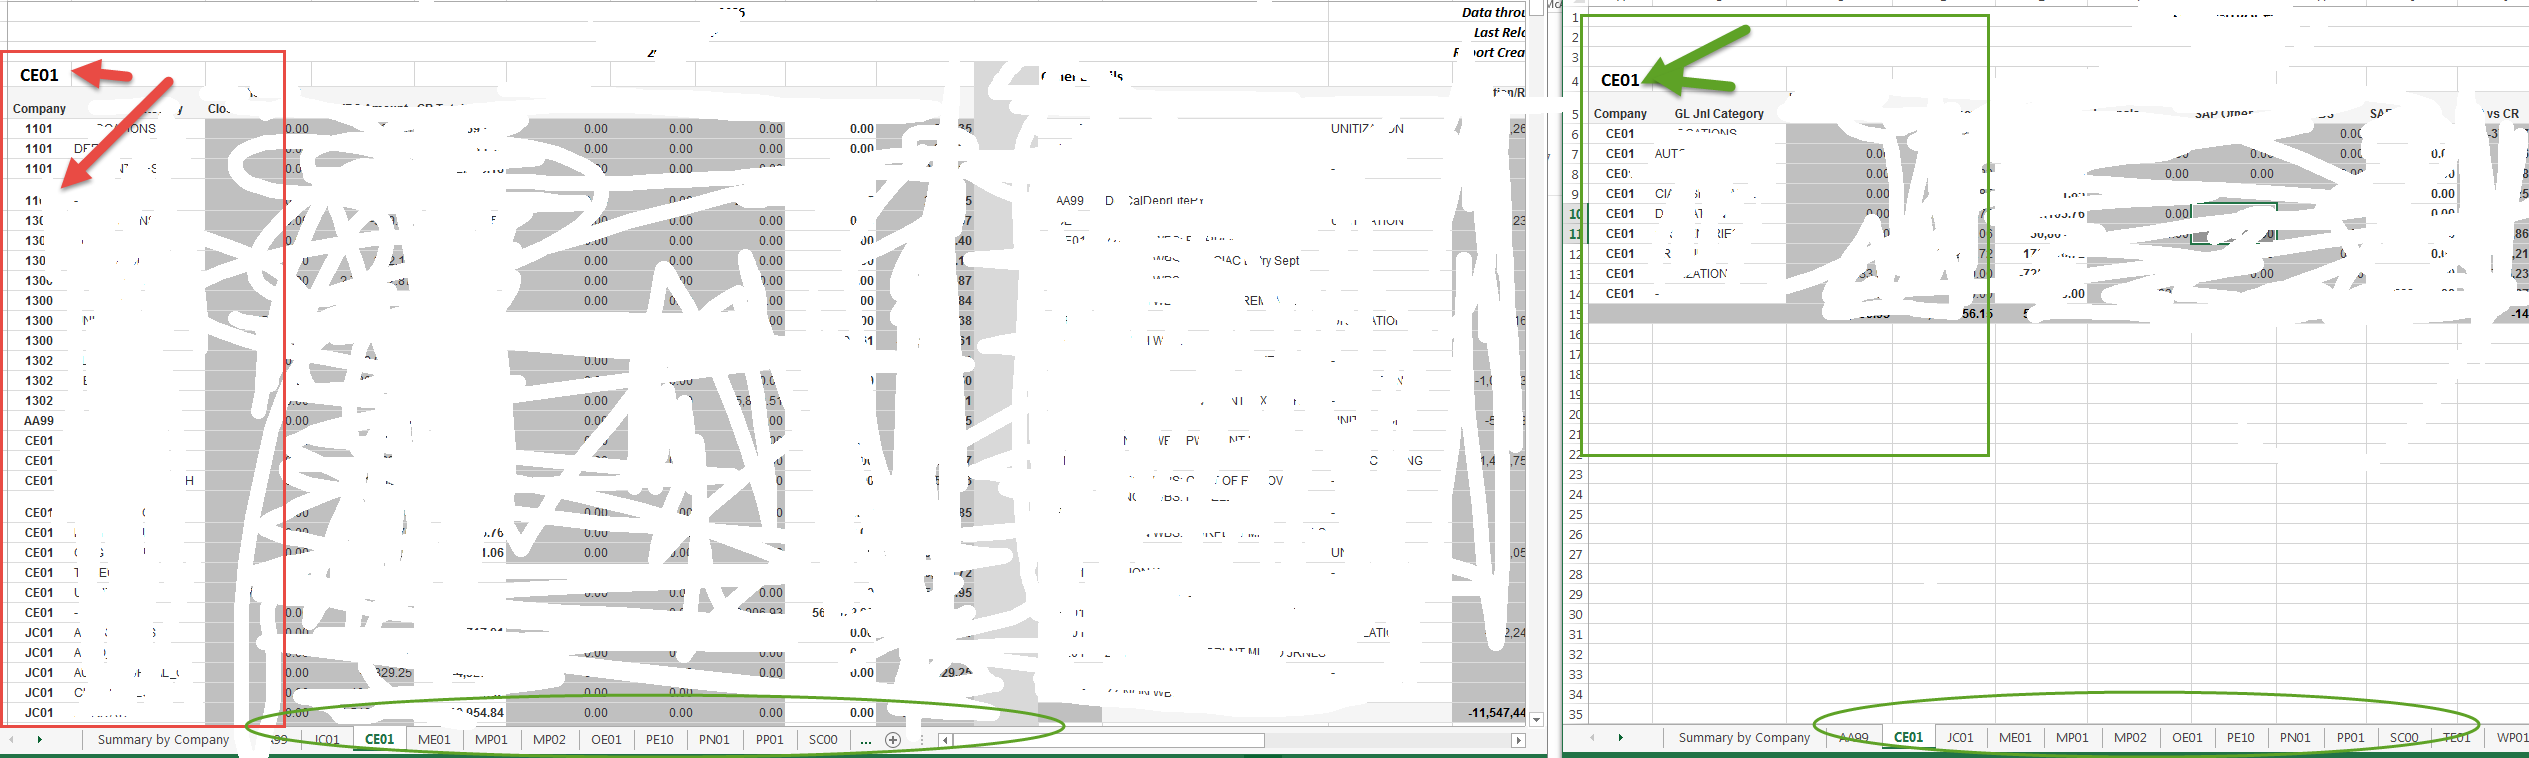 excel template issue.png